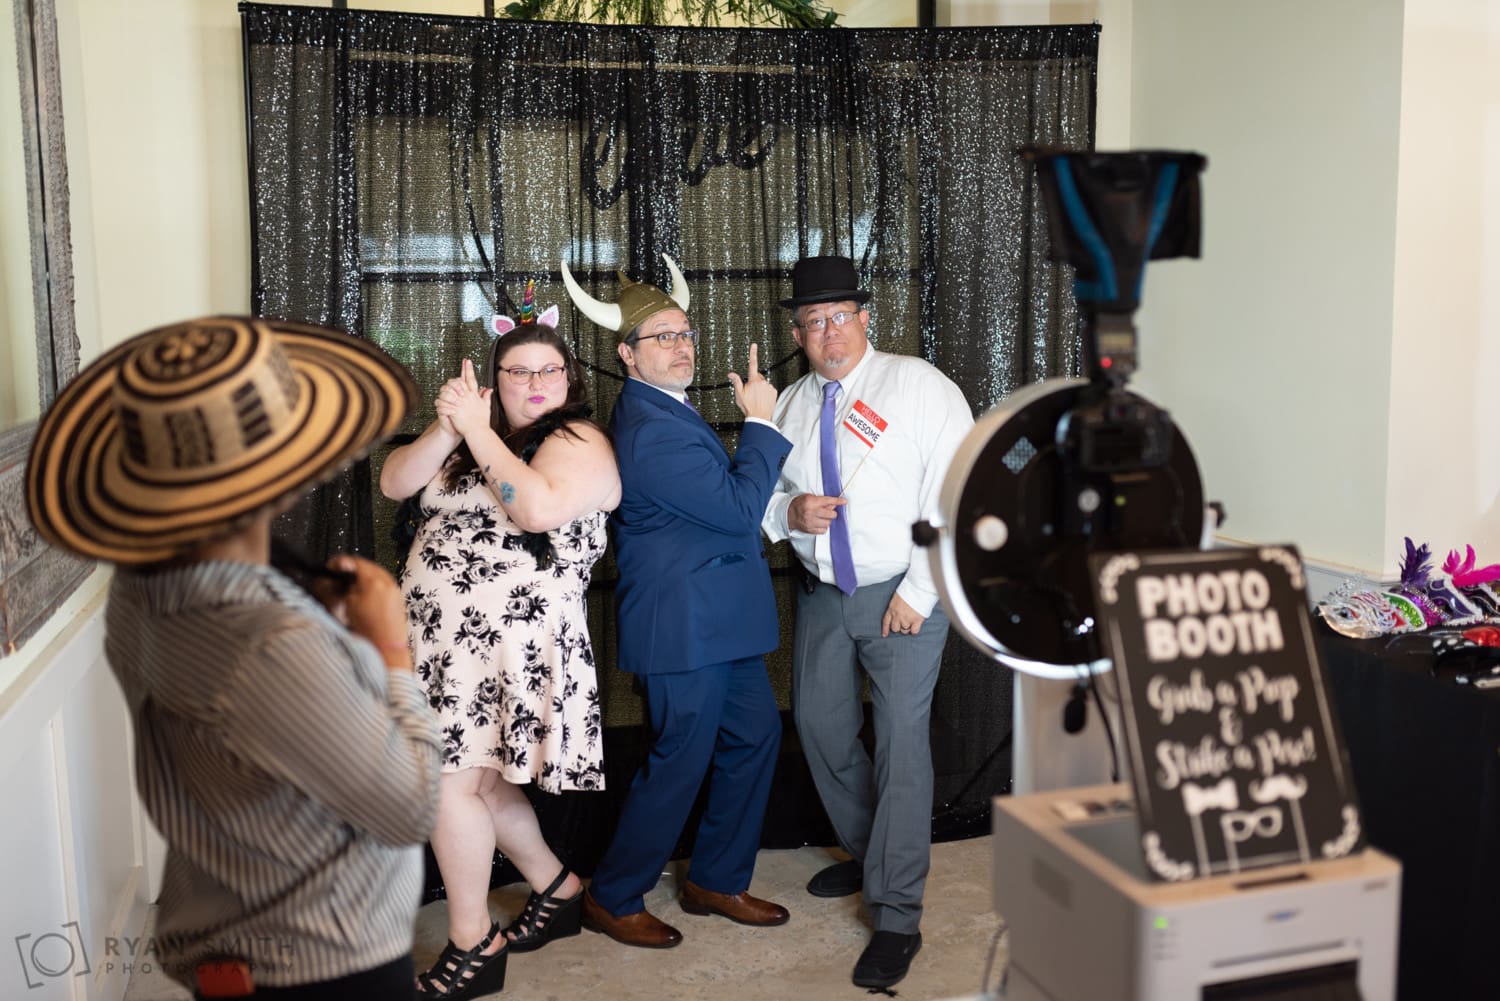 Having fun in the photo booth - 21 Main Events